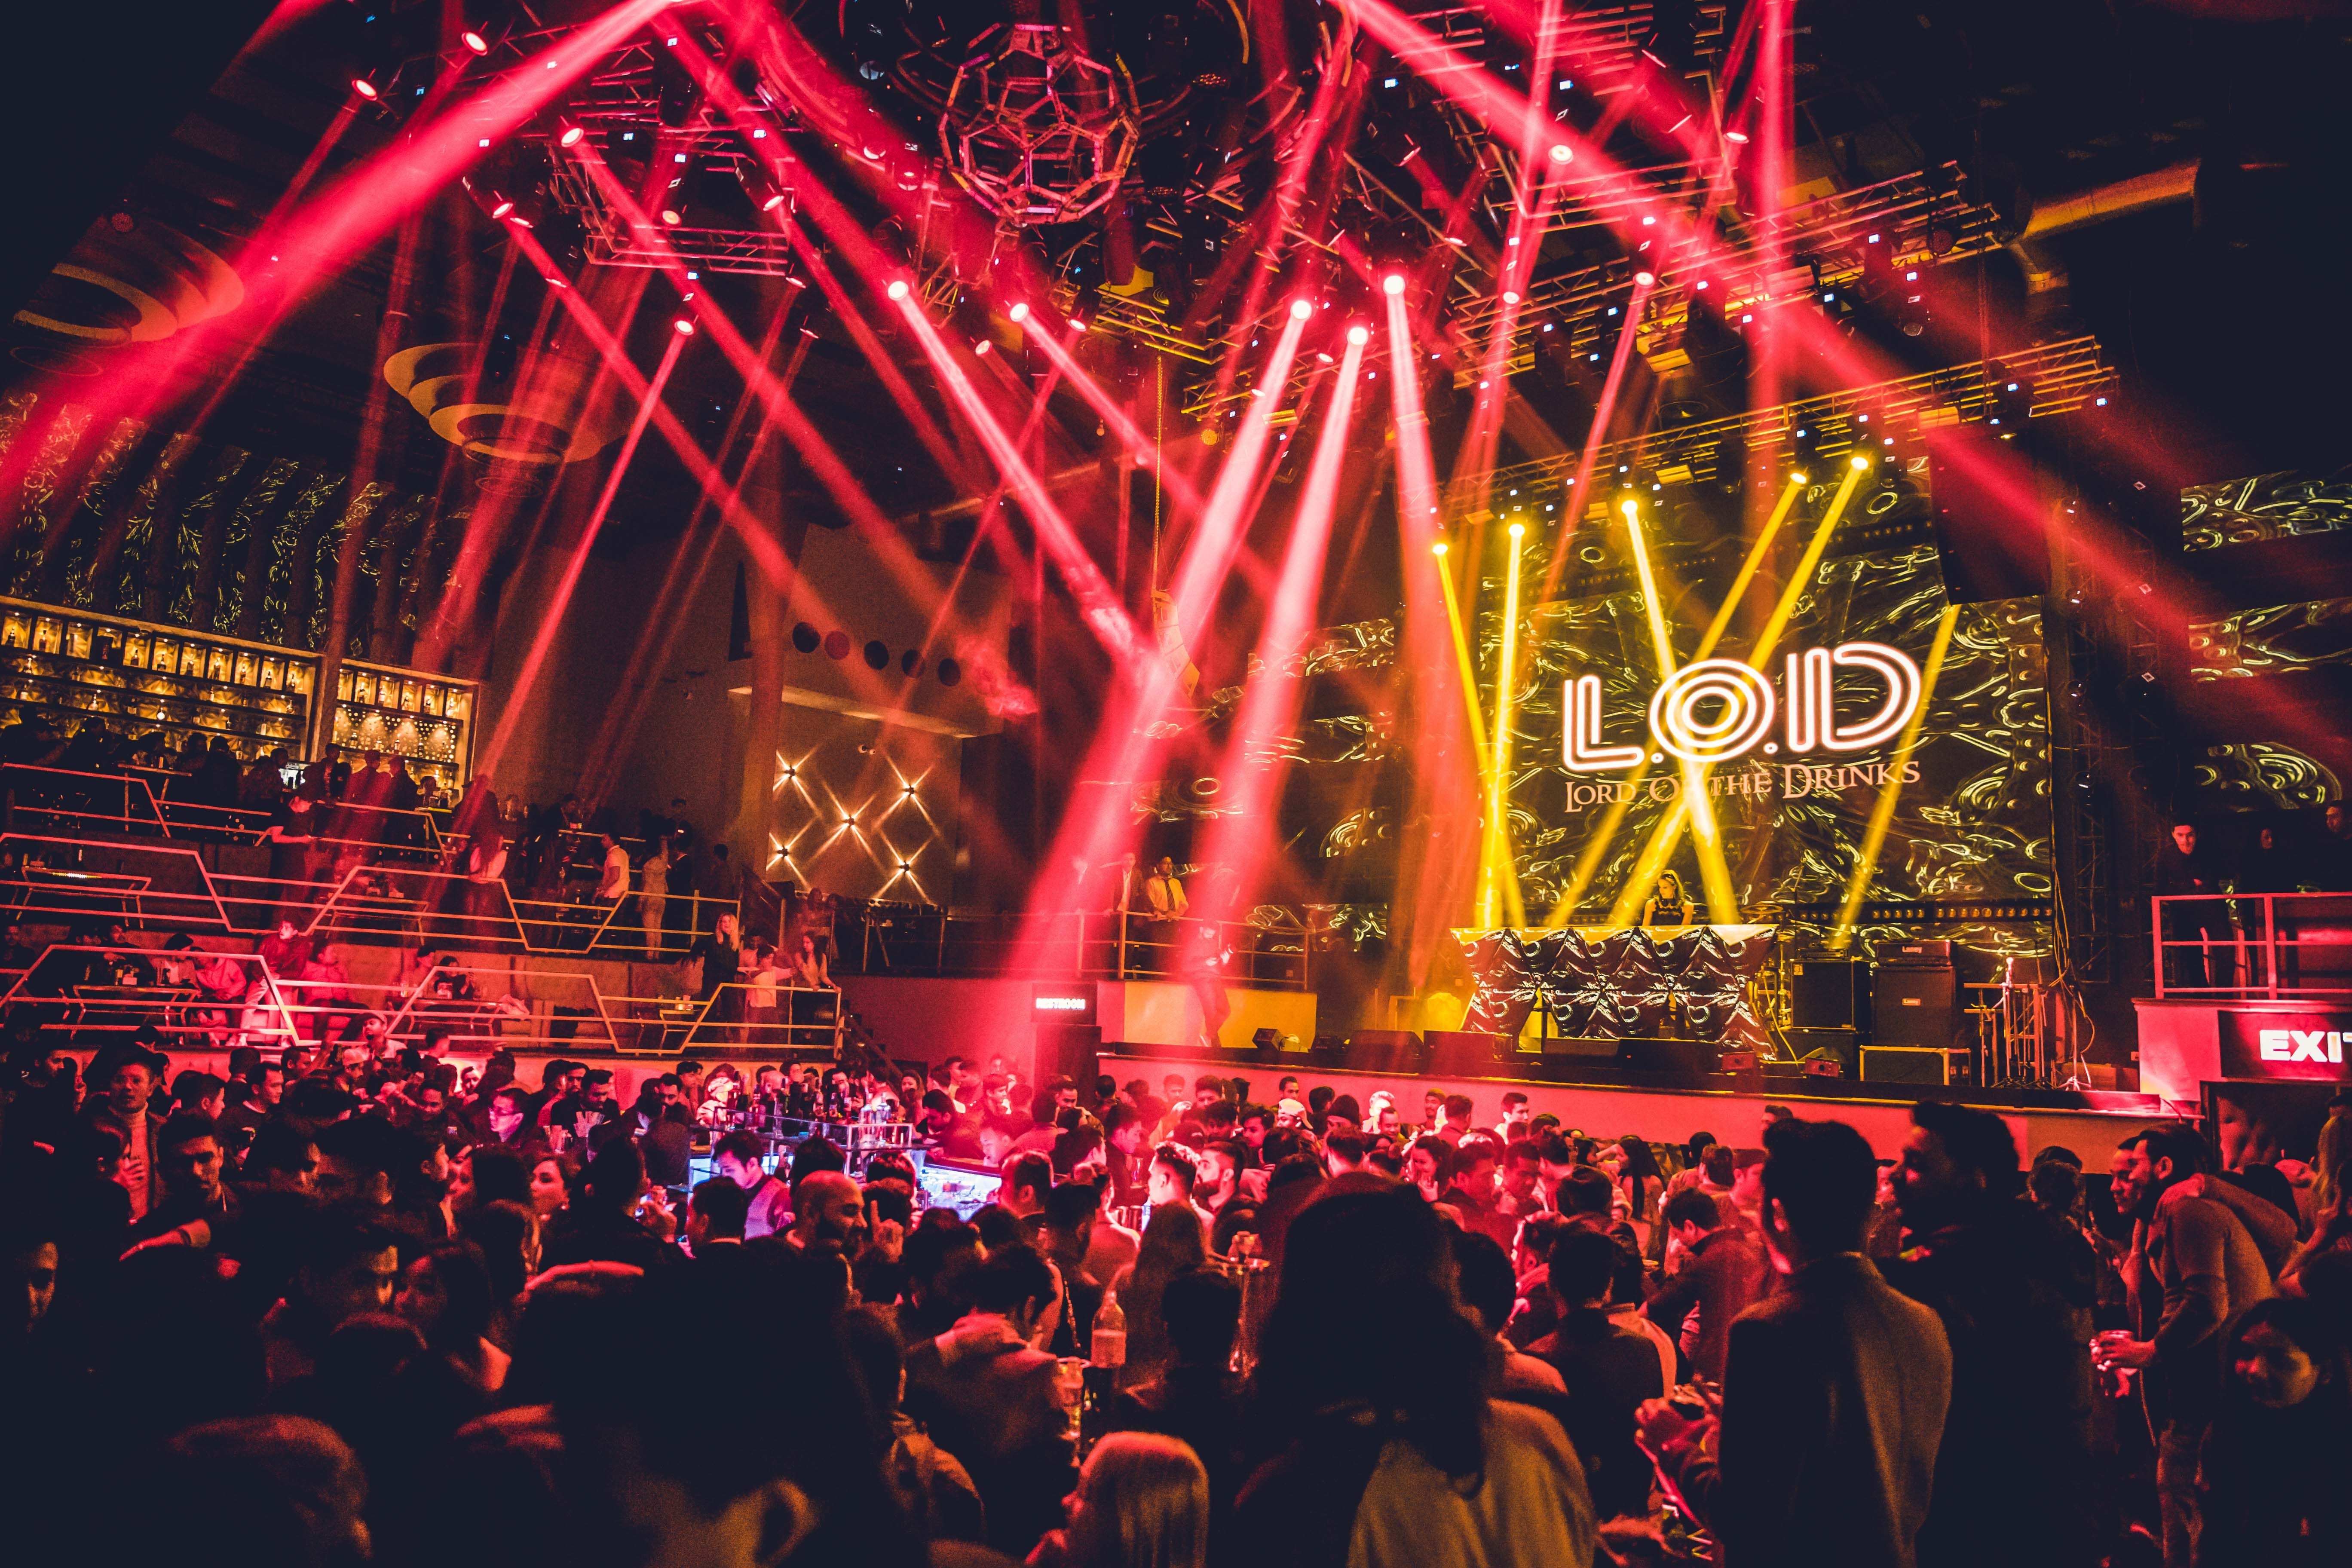 lod-lord-of-the-drinks-top-100-clubs-2022-djmag